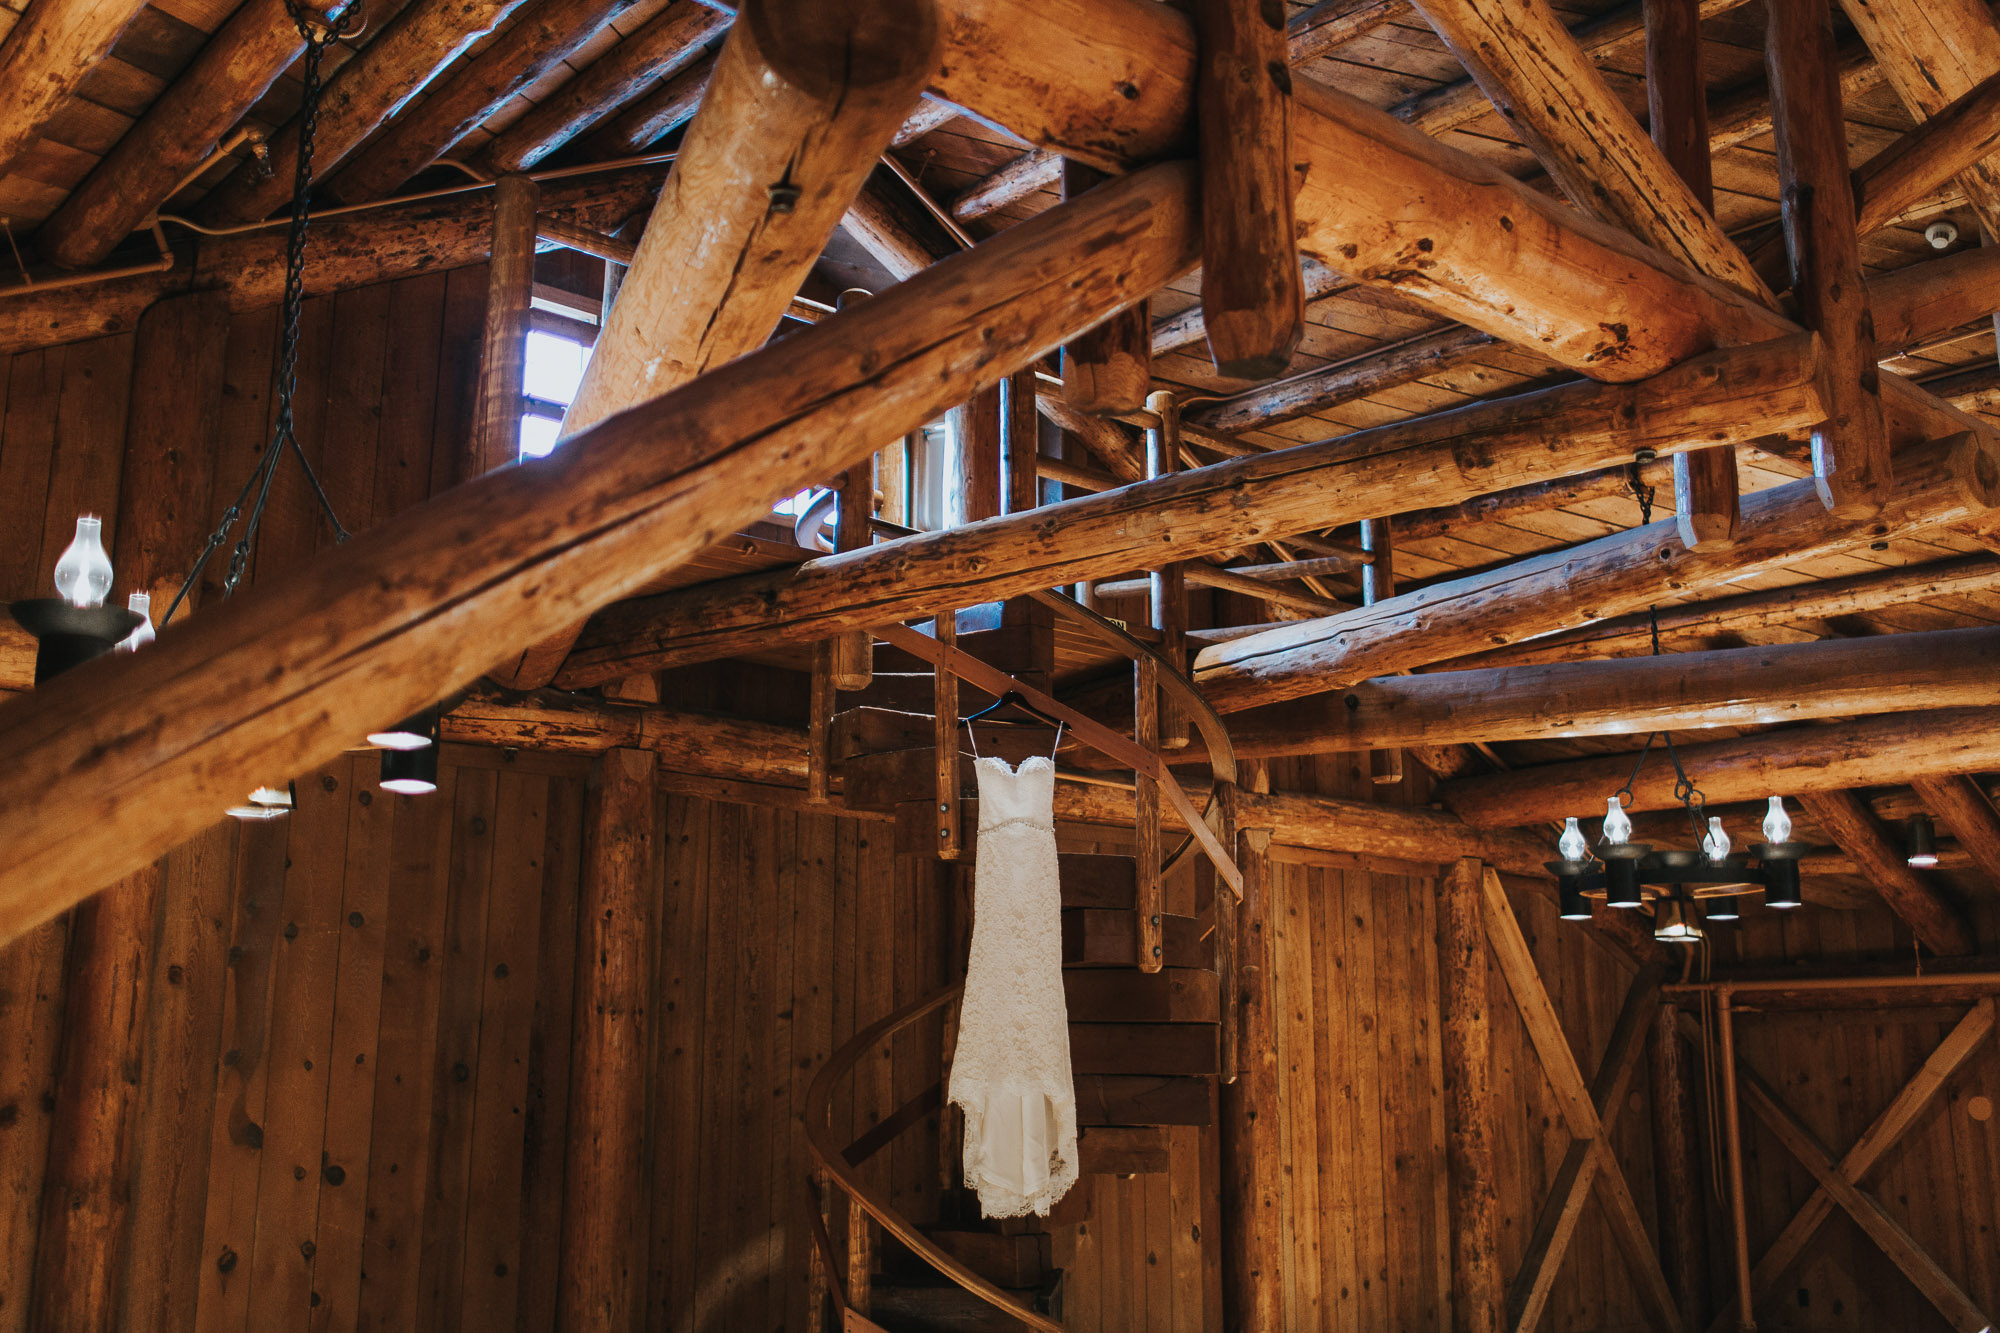 Marley's dress hangs from a spiral staircase in the Sunriver Great Hall.